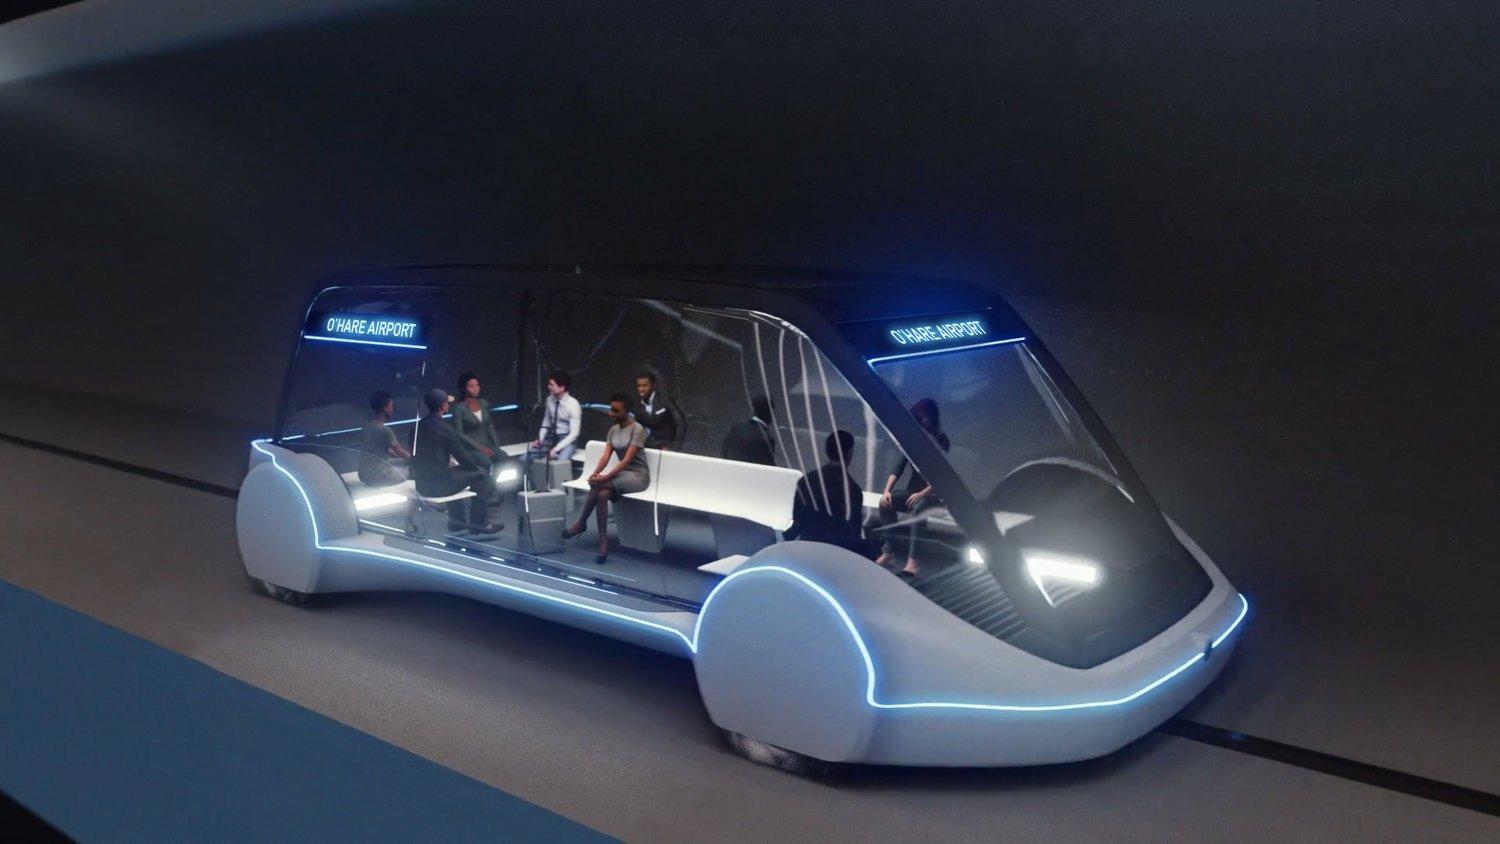 Elon Musk’s proposal called for an underground system that would transport travelers on pods of 8-16 people at speeds of 125-150 mph. (Credit: The Boring Company)